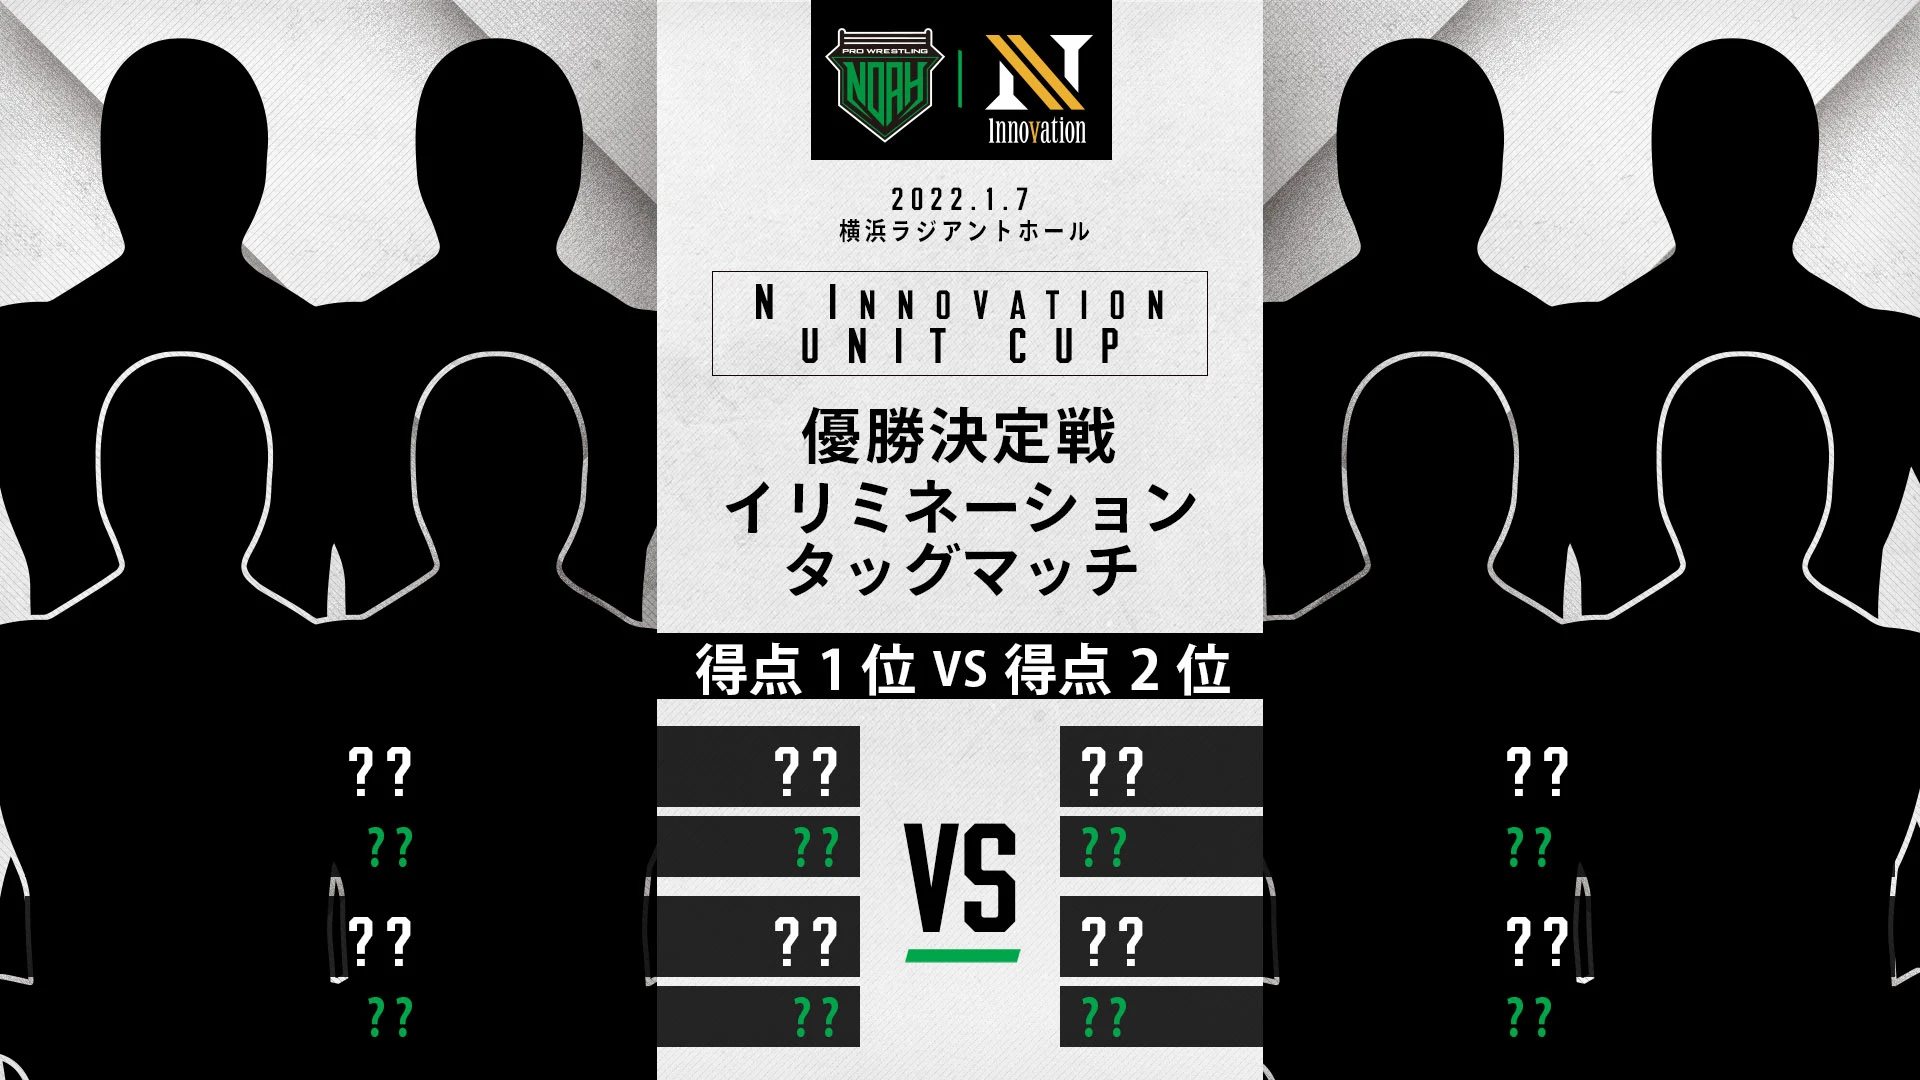 【1.7・DAY2 U-CUP】ザ・リーヴpresents N Innovation U-CUP対戦カード変更のお知らせ